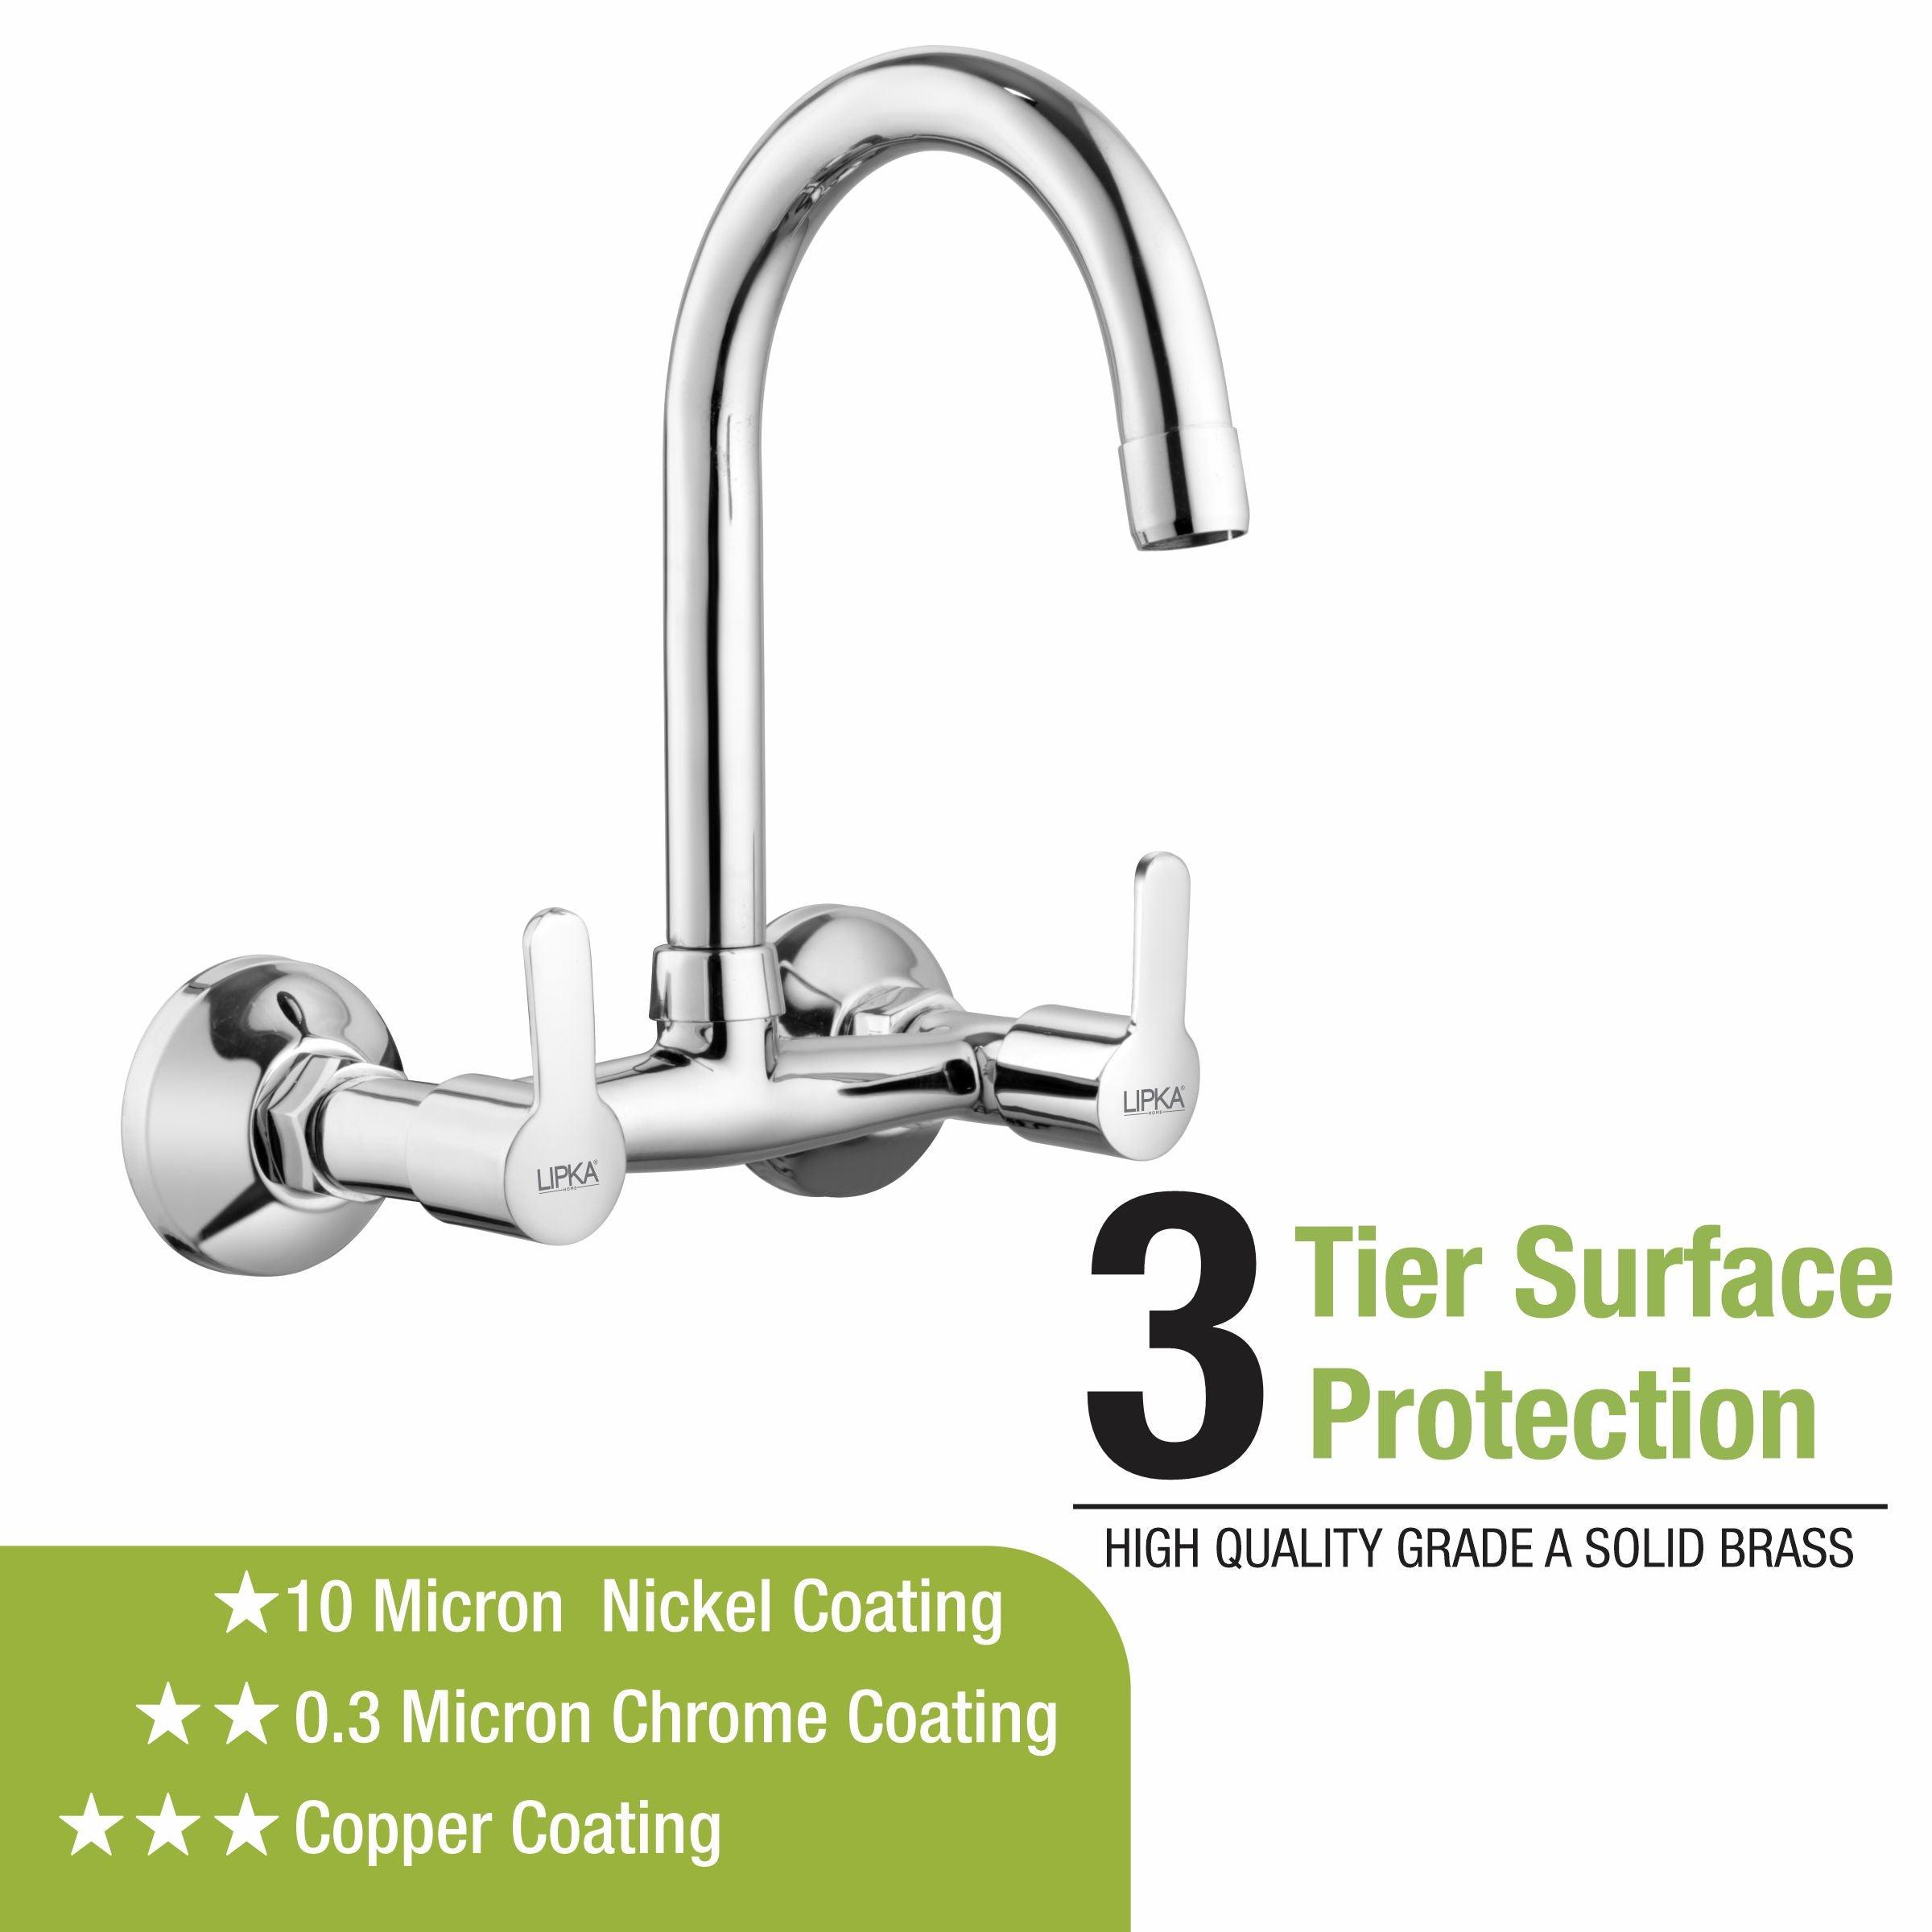 Frenk Sink Mixer Brass Faucet with Round Swivel Spout (15 Inches) 3 tier protection